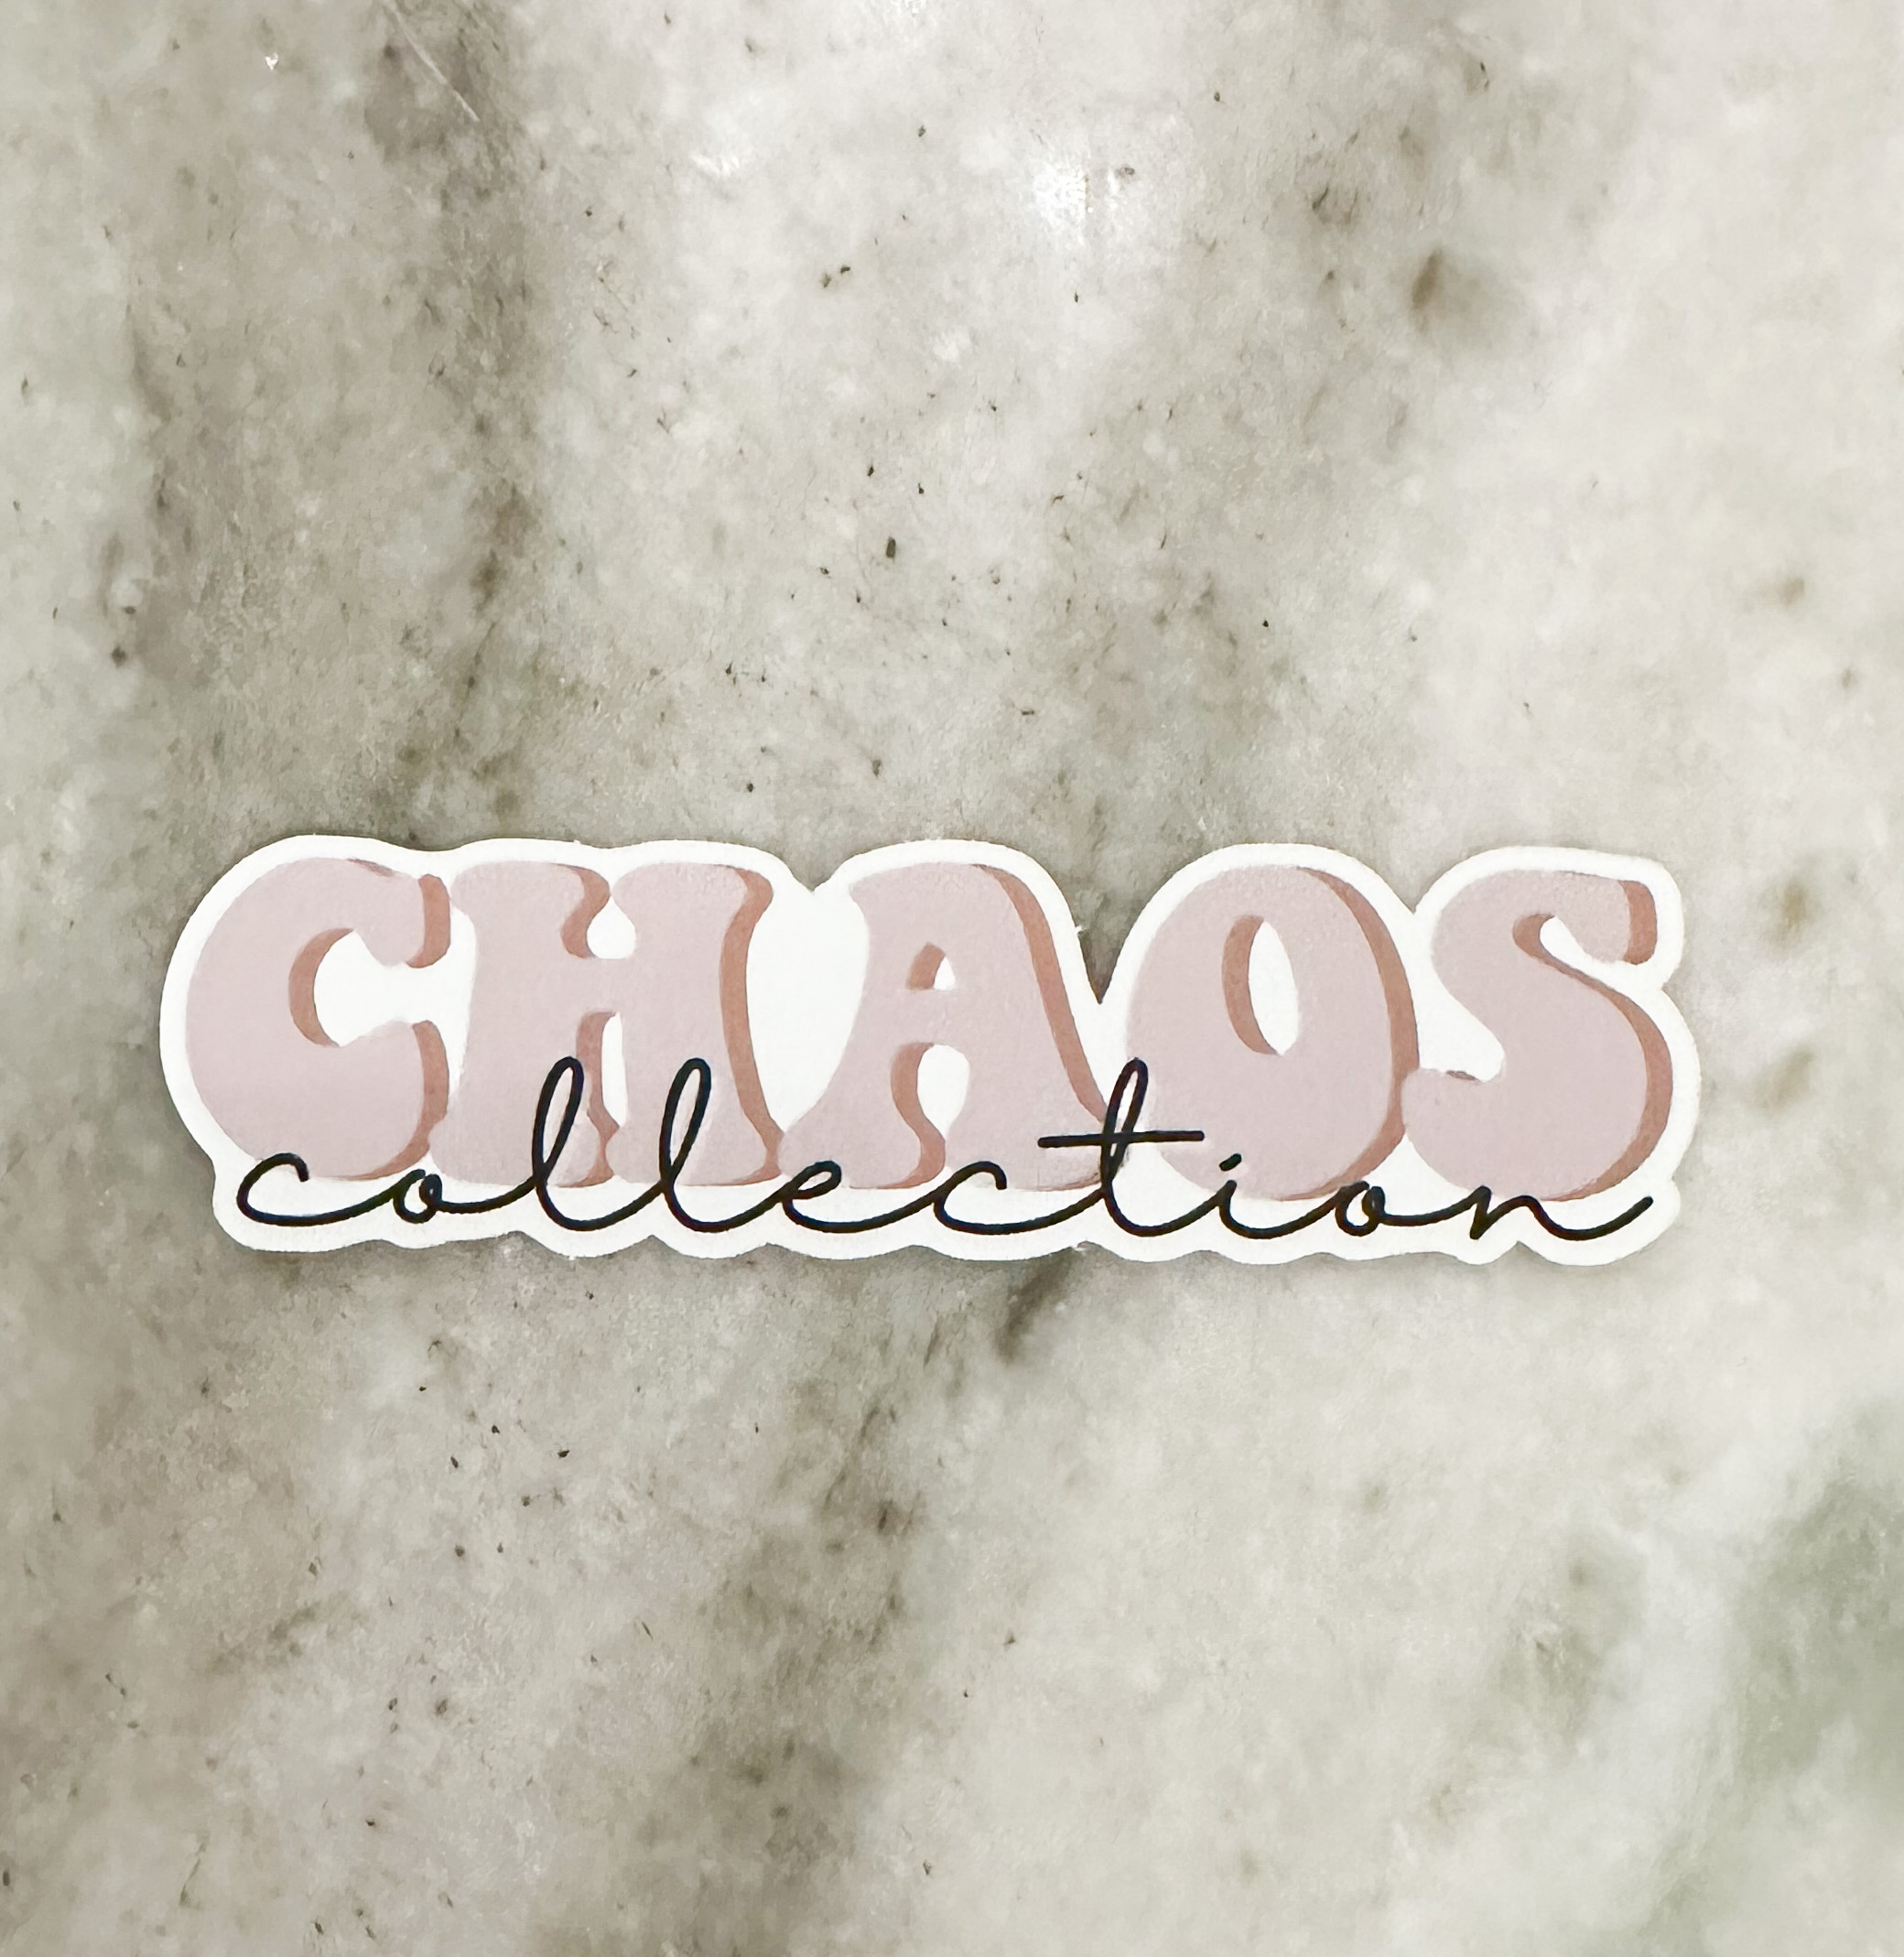 Chaos Collection sticker